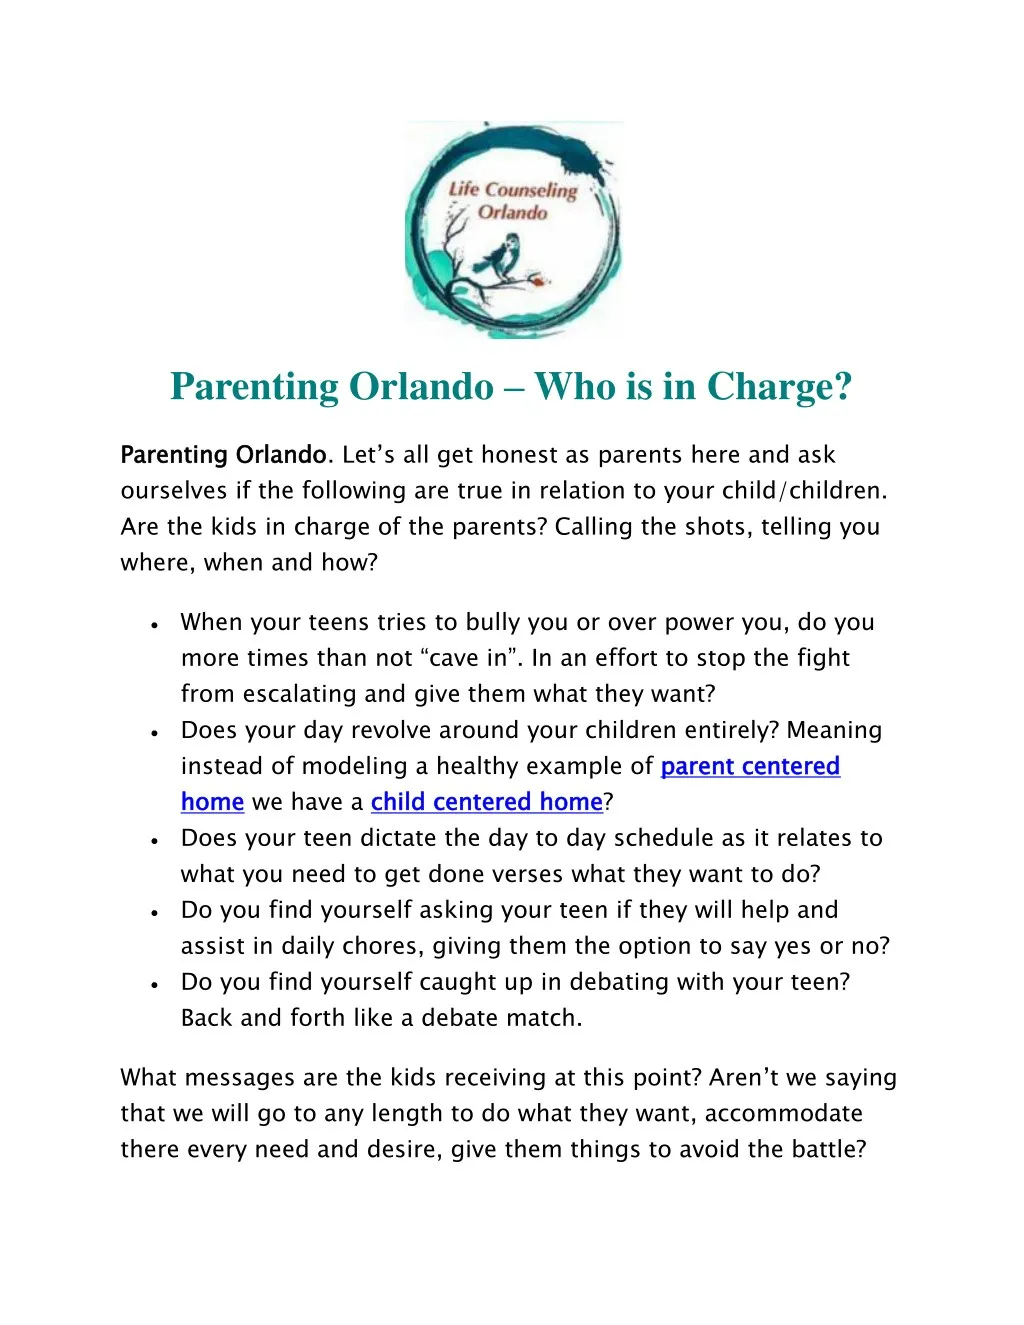 parenting orlando who is in charge